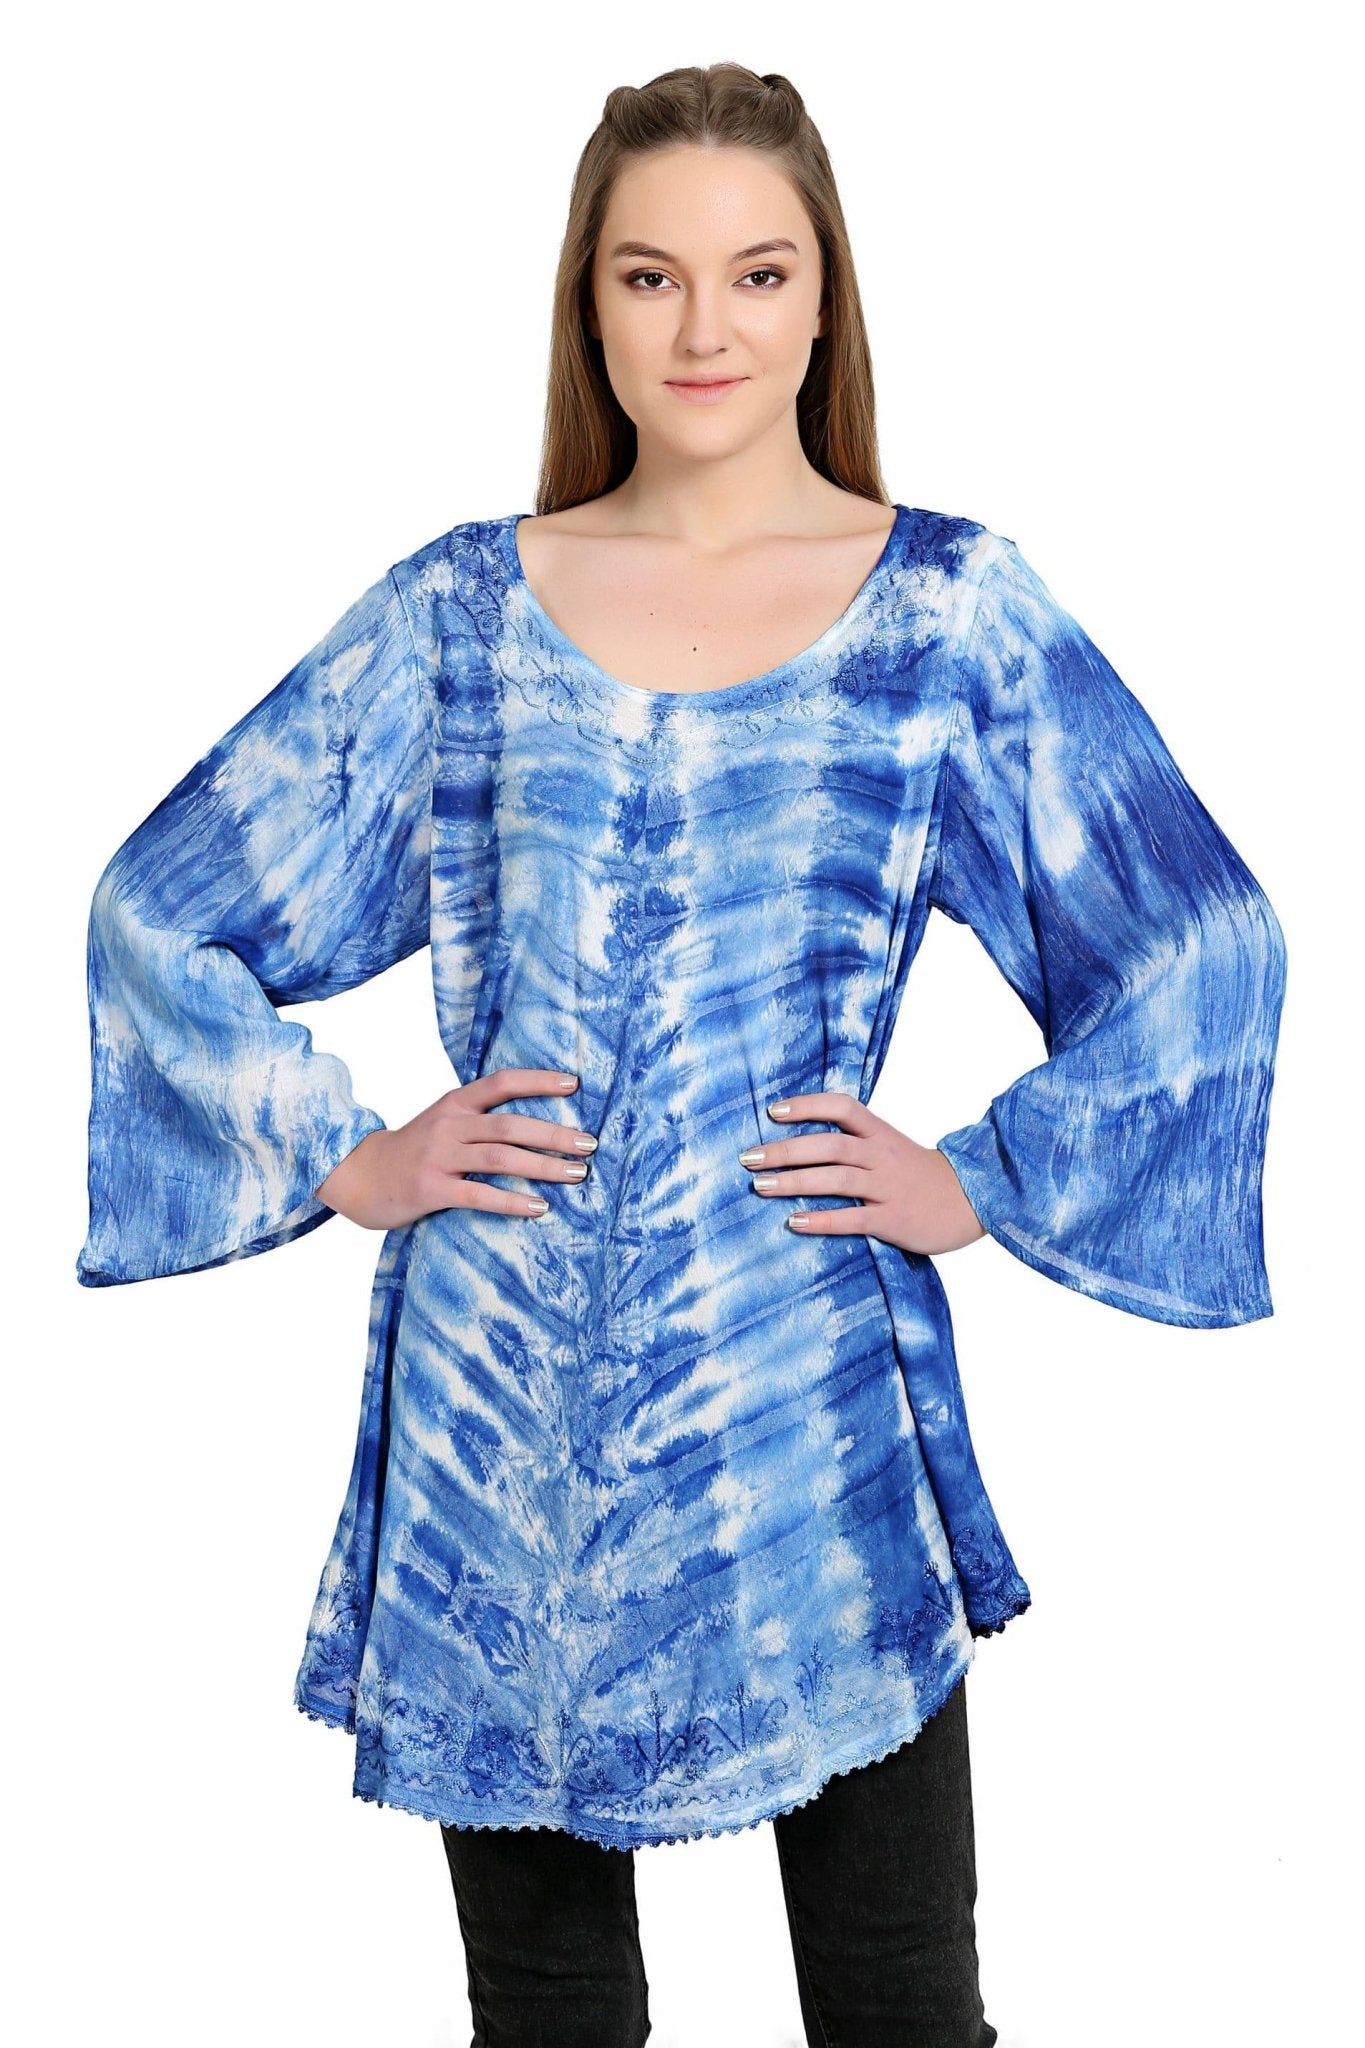 Three Quarter Sleeve Tie Dye Blouse One Size Fits Most 6 Colors 19258 - Advance Apparels Inc